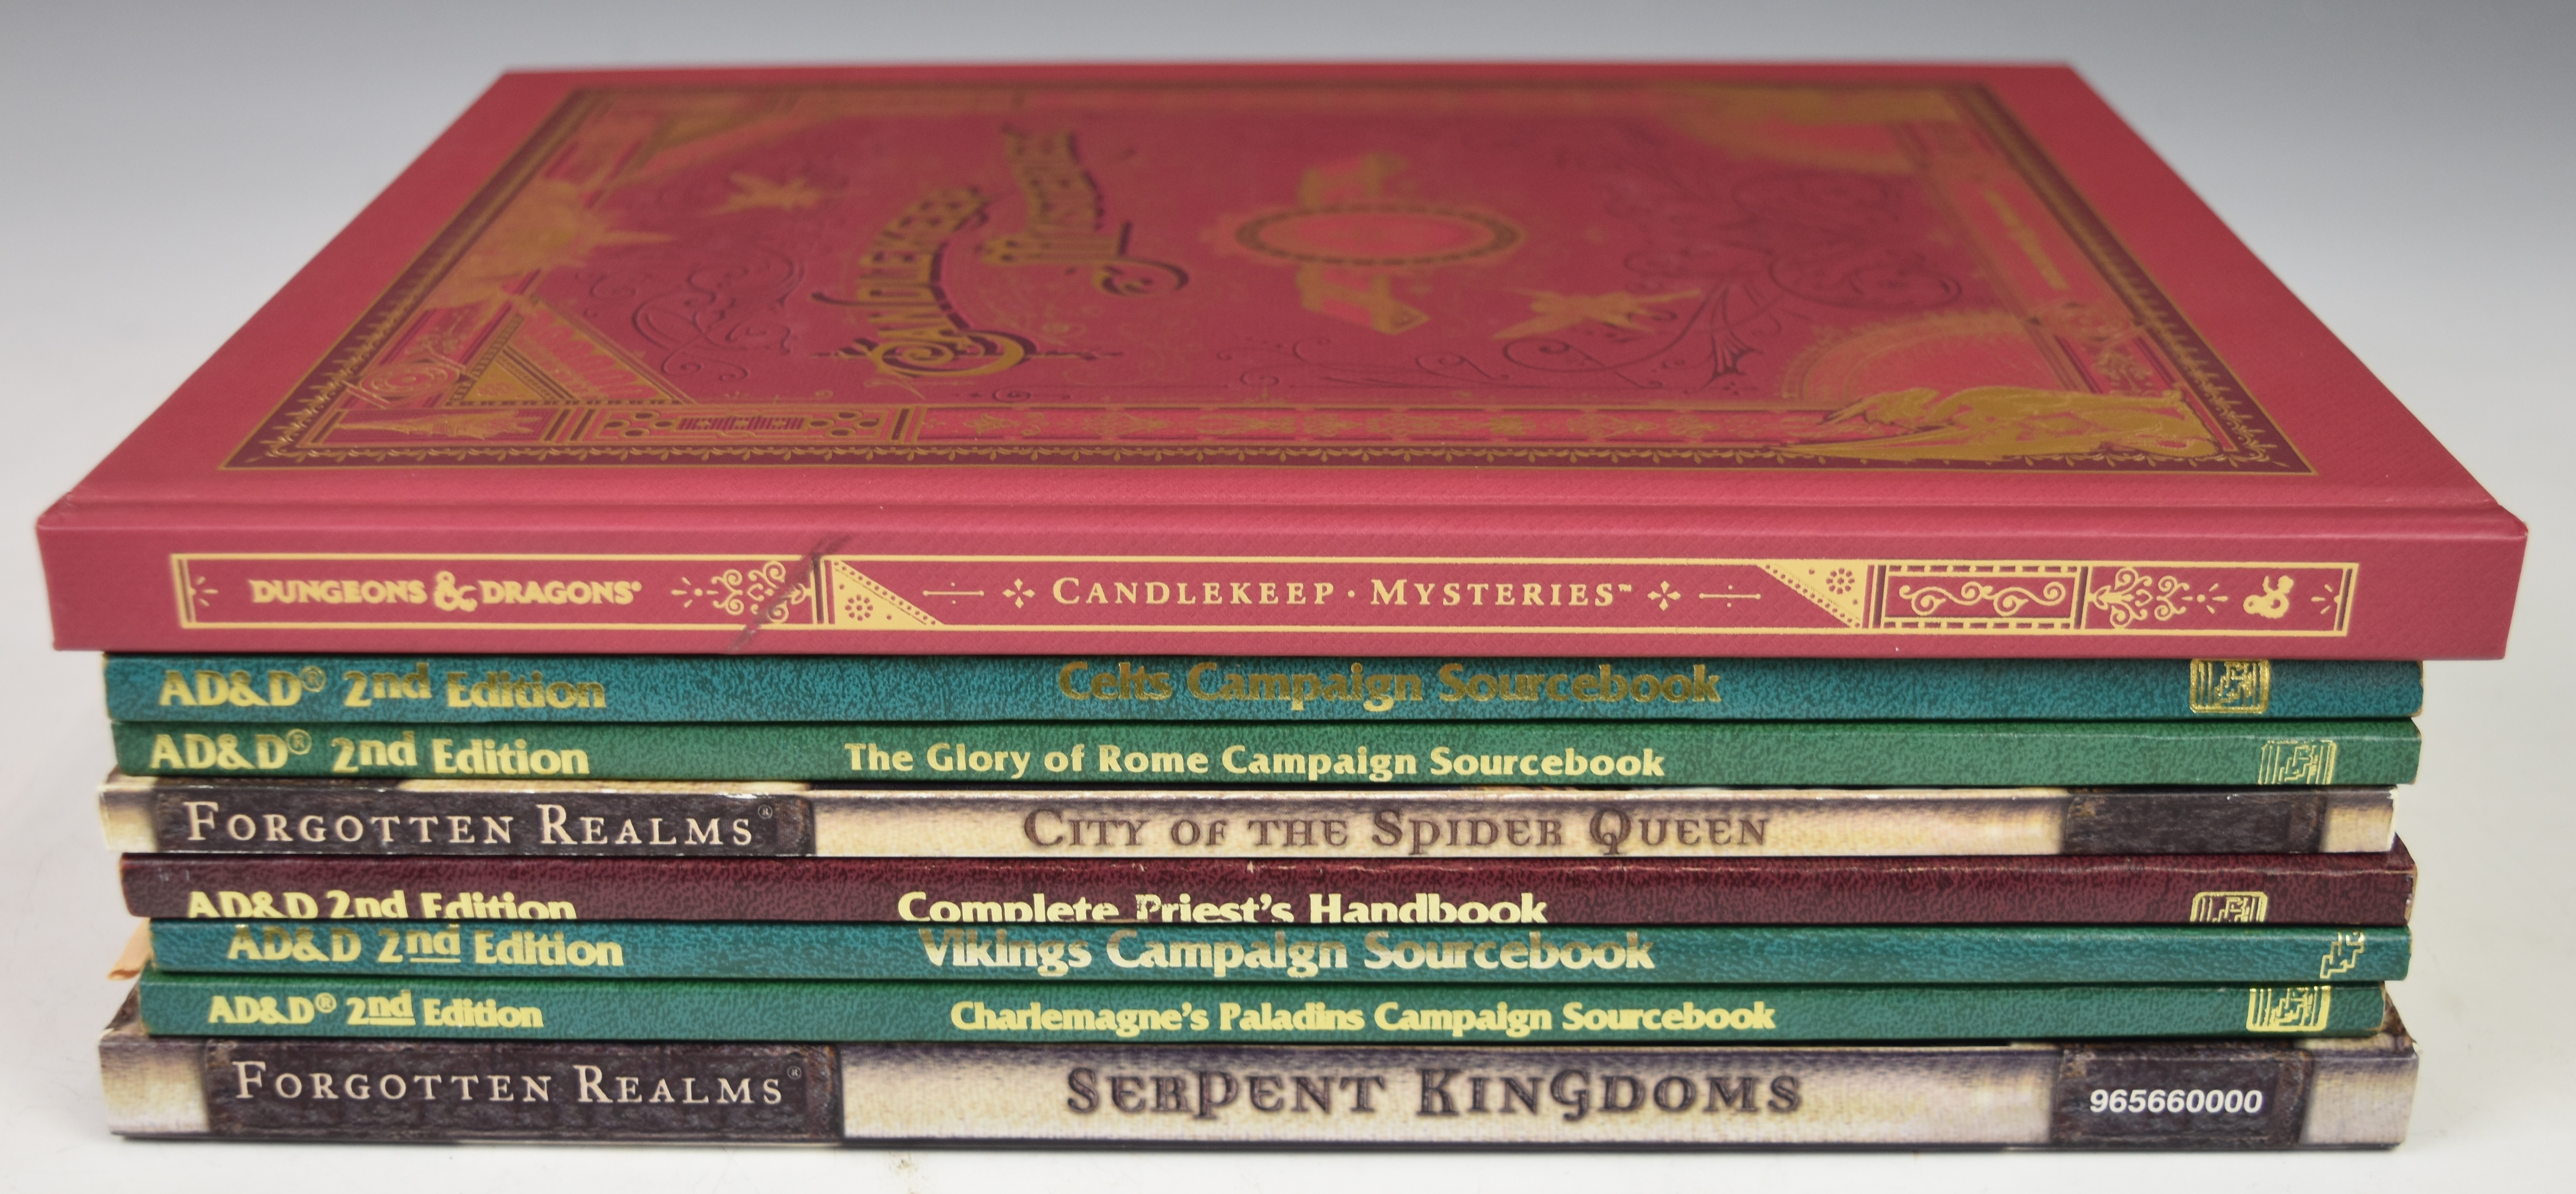 Dungeons and Dragons Candlekeep Mysteries by Wizards of The Coast together with 7 AD&D sourcebooks.